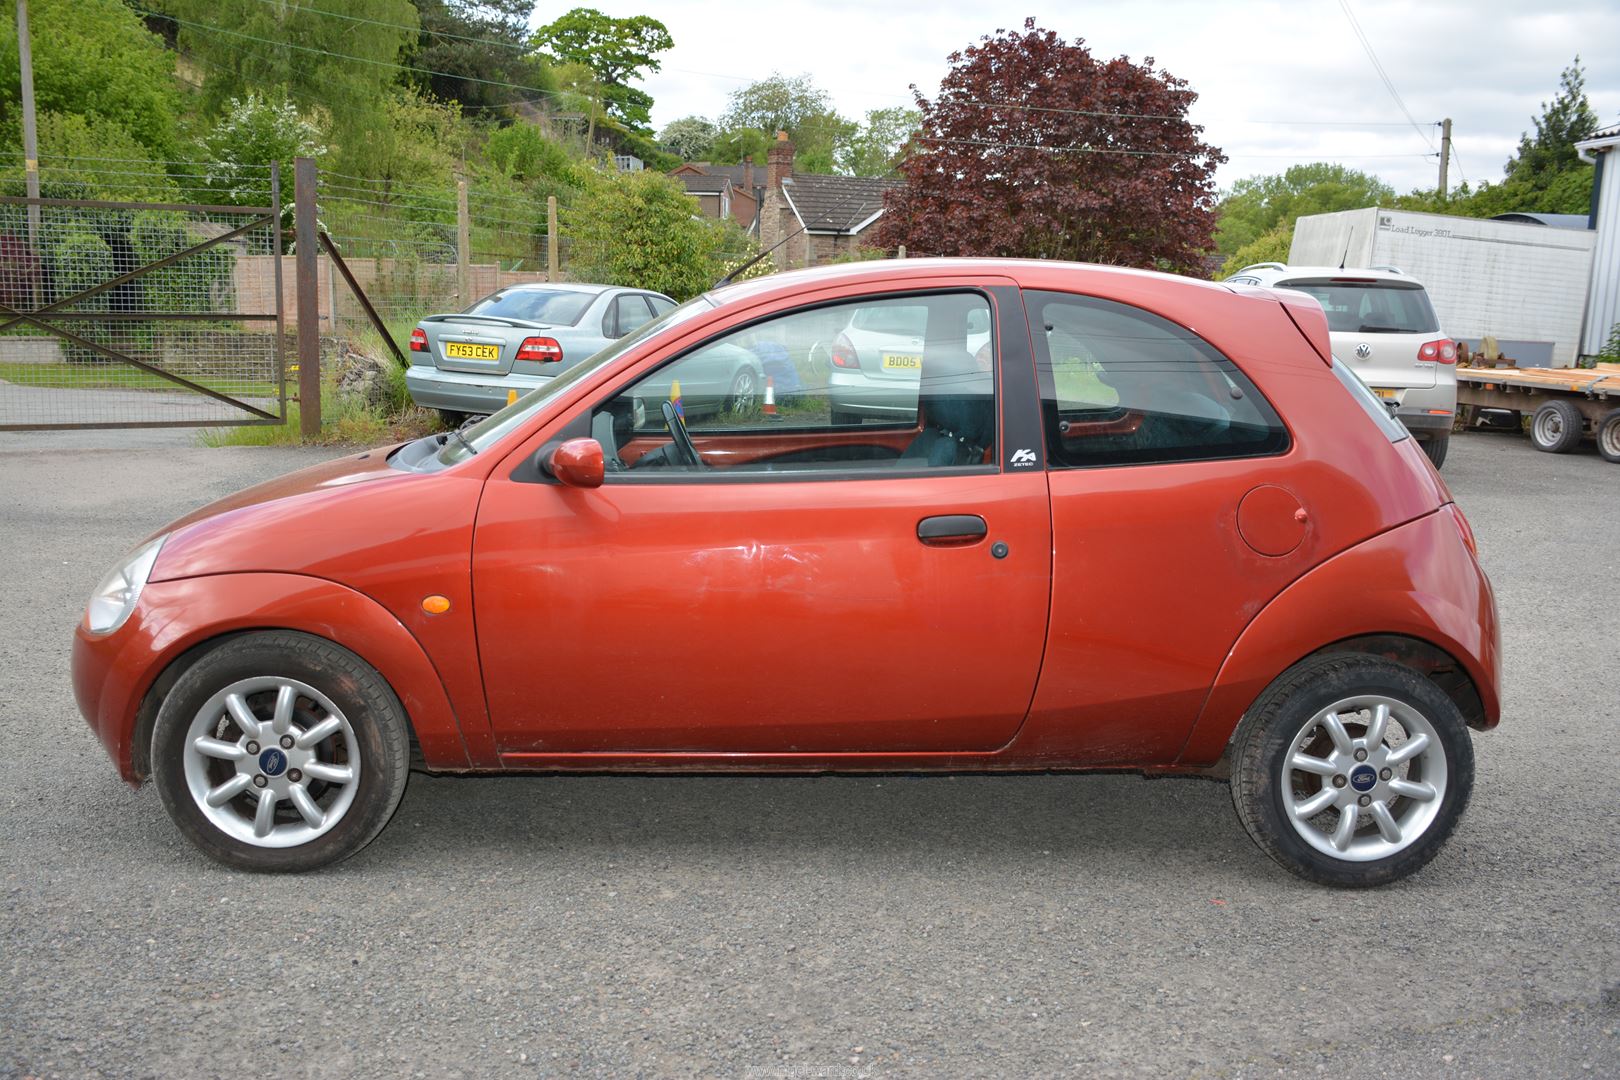 A Ford KA Zetec Climate 1299cc petrol-engined three door hatchback motor Car finished in red, - Image 4 of 14